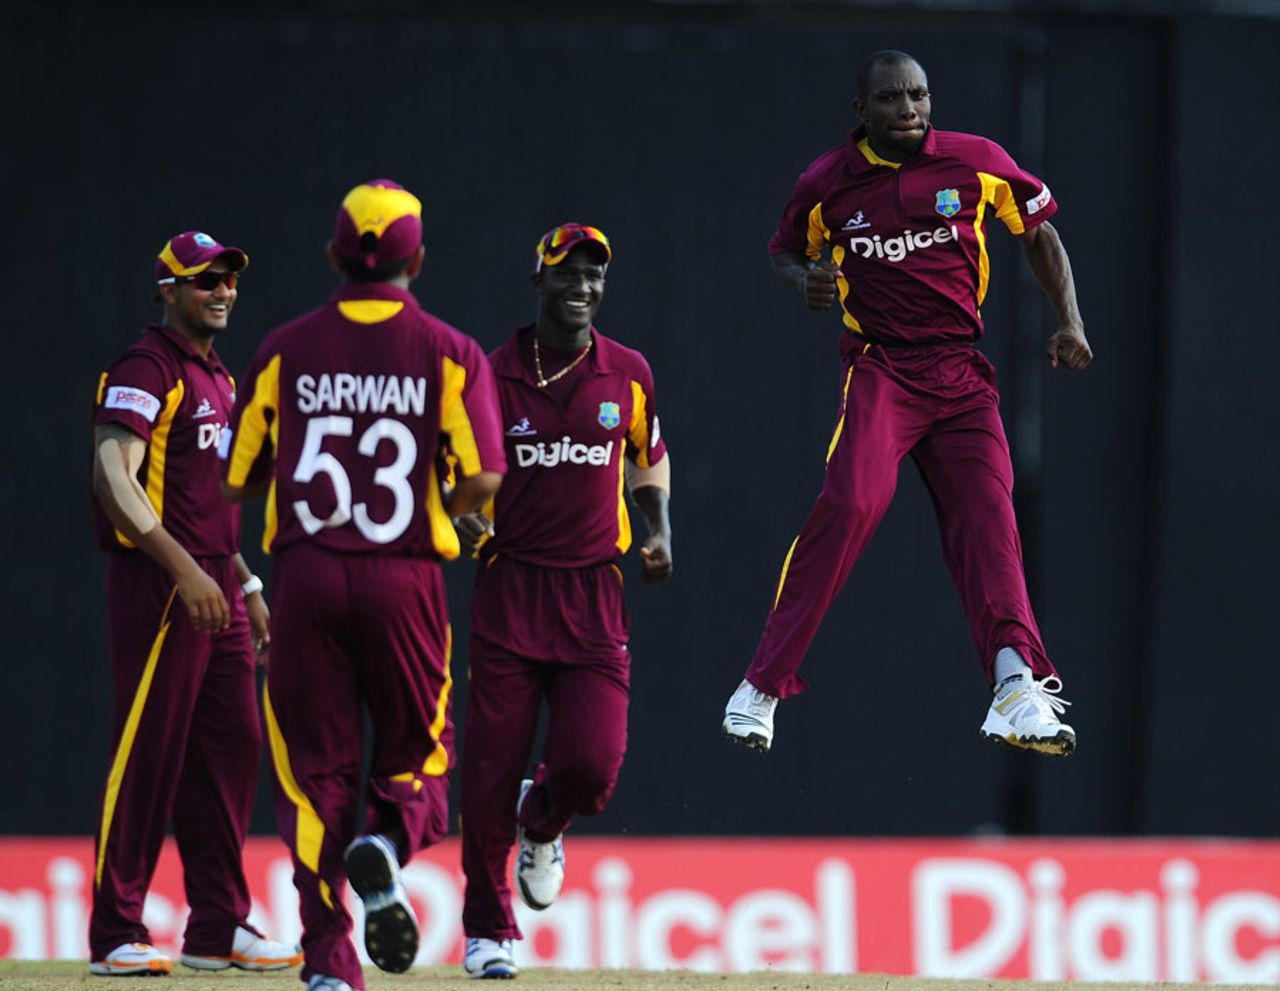 Anthony Martin is ecstatic after claiming a wicket, West Indies v India, 4th ODI, Antigua, June 13, 2011